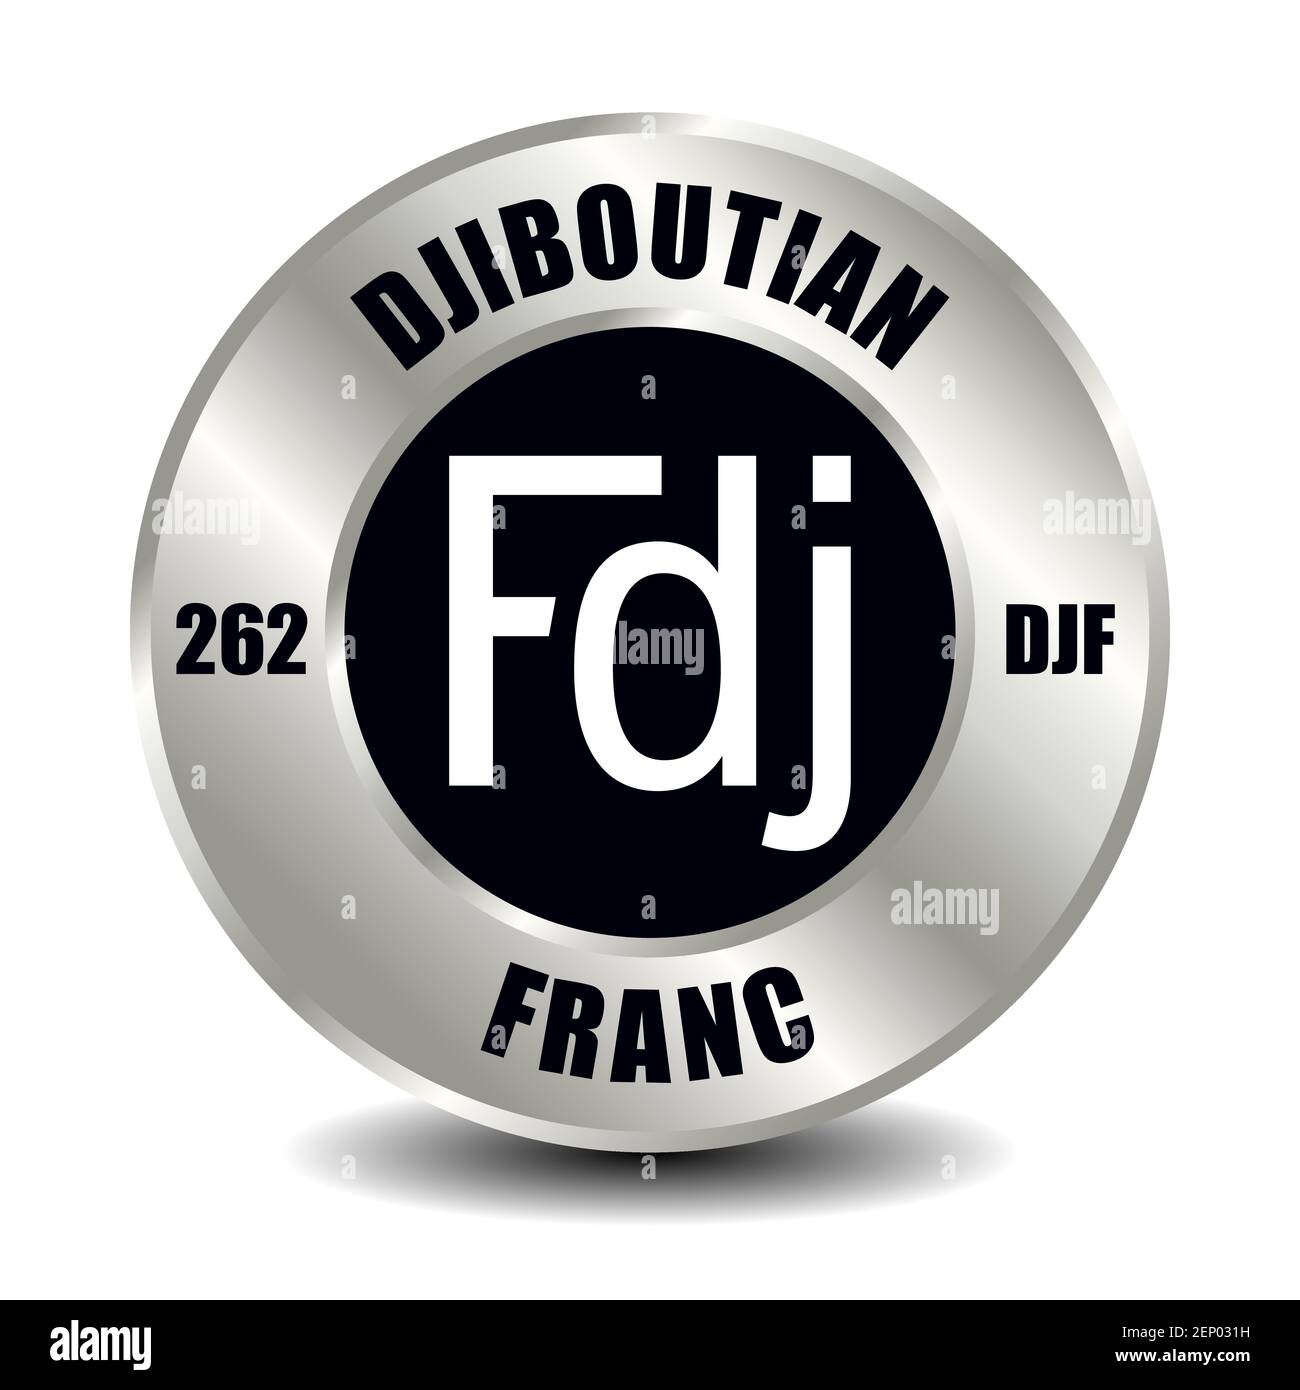 Djibouti money icon isolated on round silver coin. Vector sign of currency symbol with international ISO code and abbreviation Stock Vector